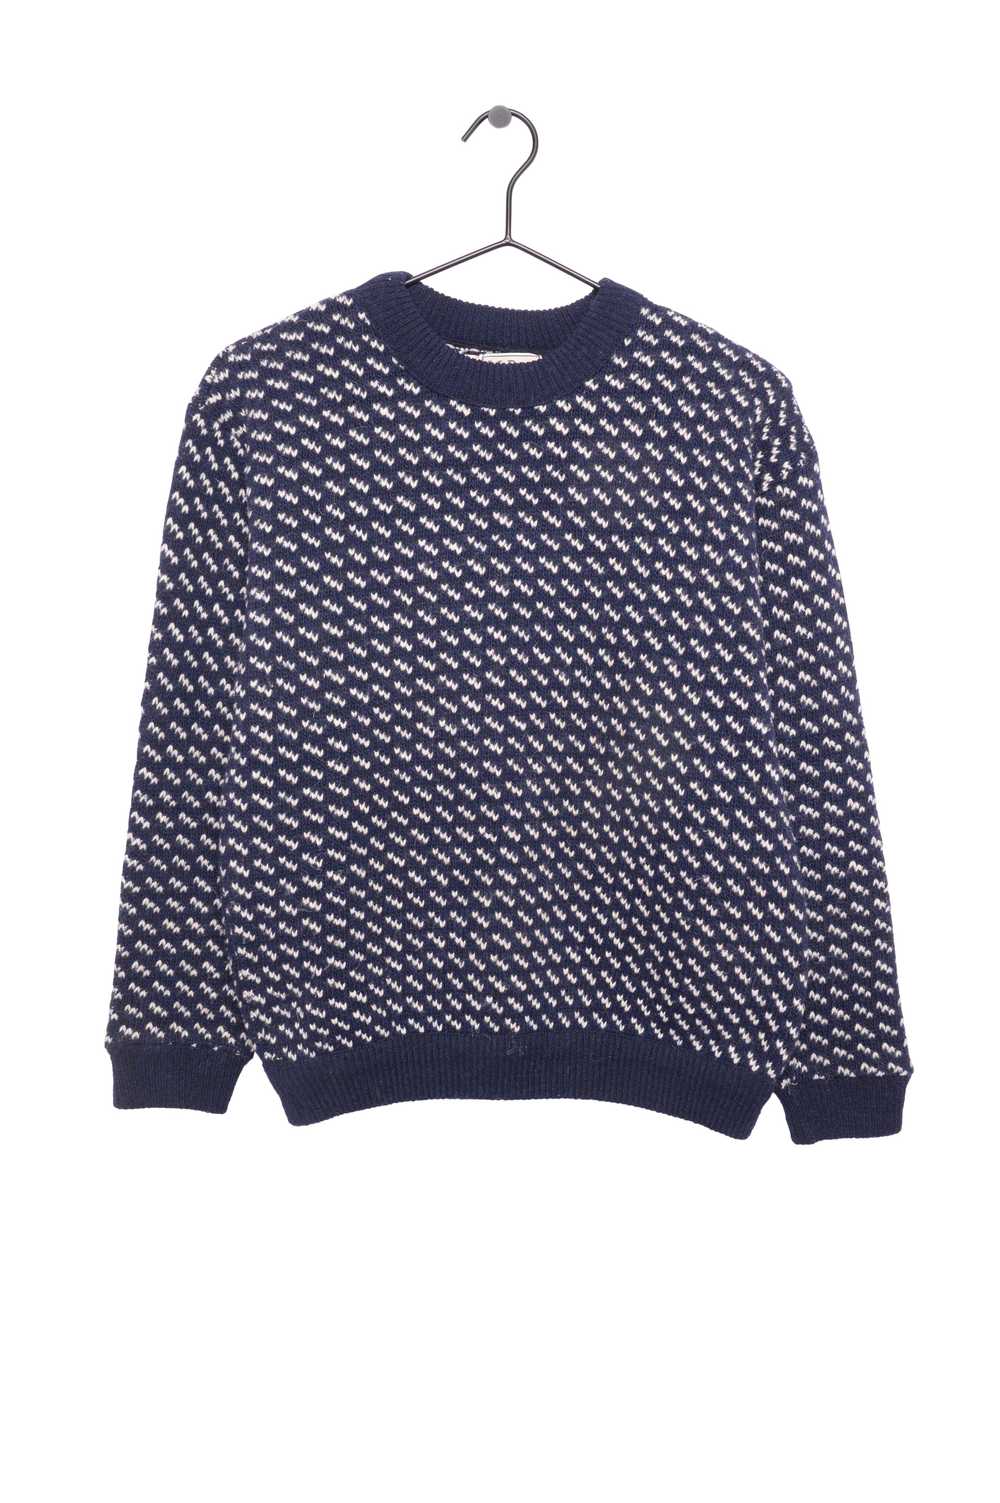 Navy Dotted Wool Sweater - image 1